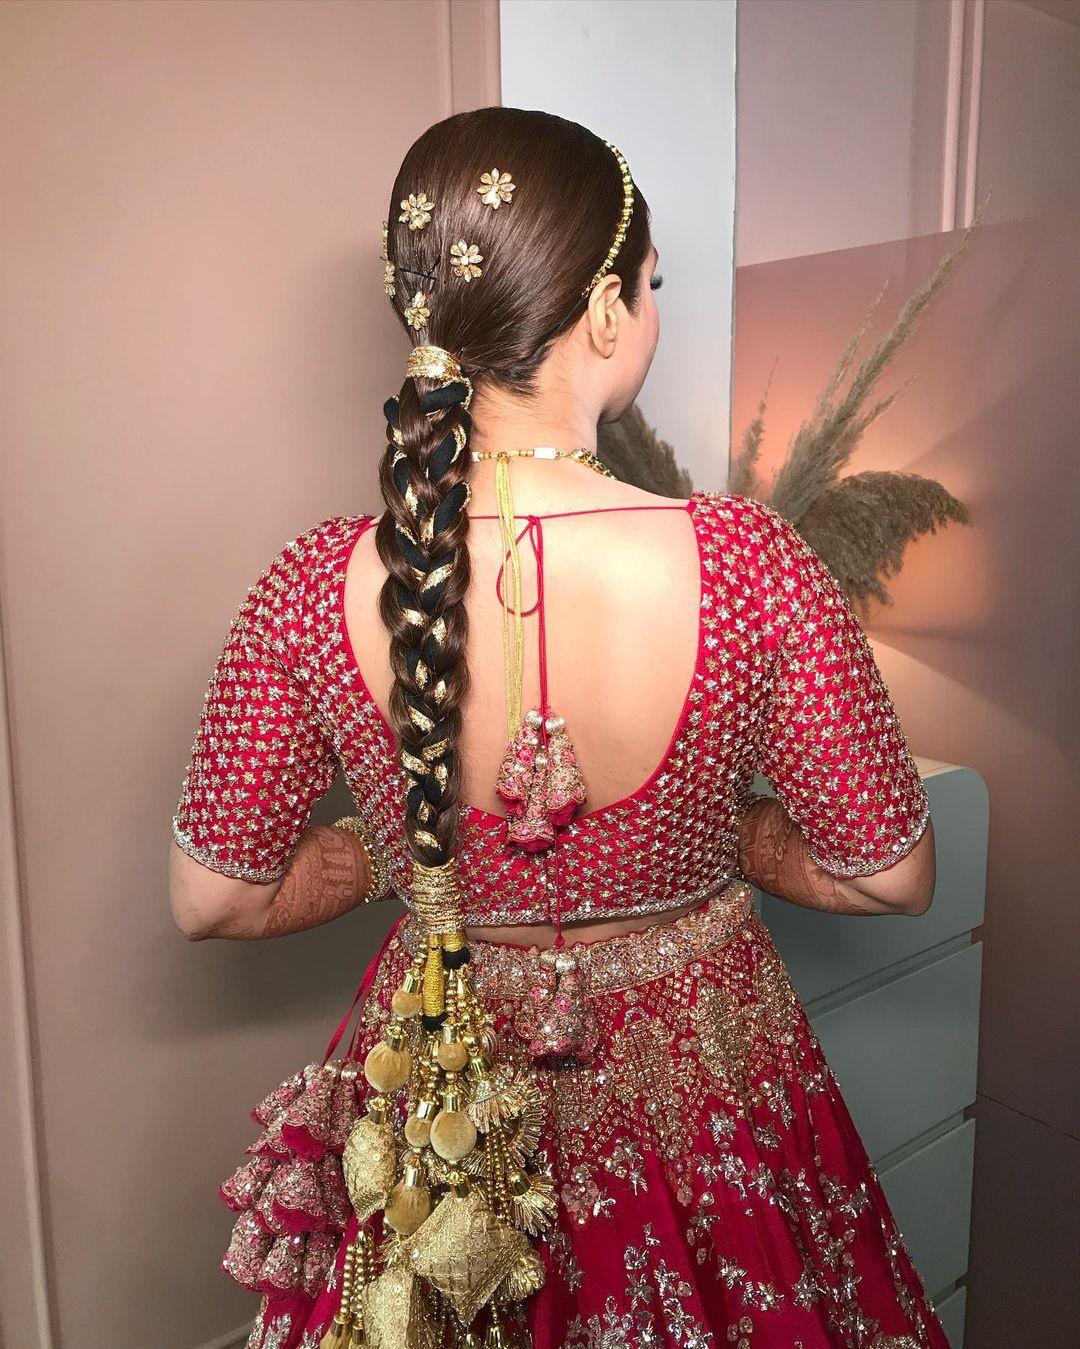 17 Ways to Wear Your Dupatta with Lehengas for Perfect Ethnic Indian Fashion